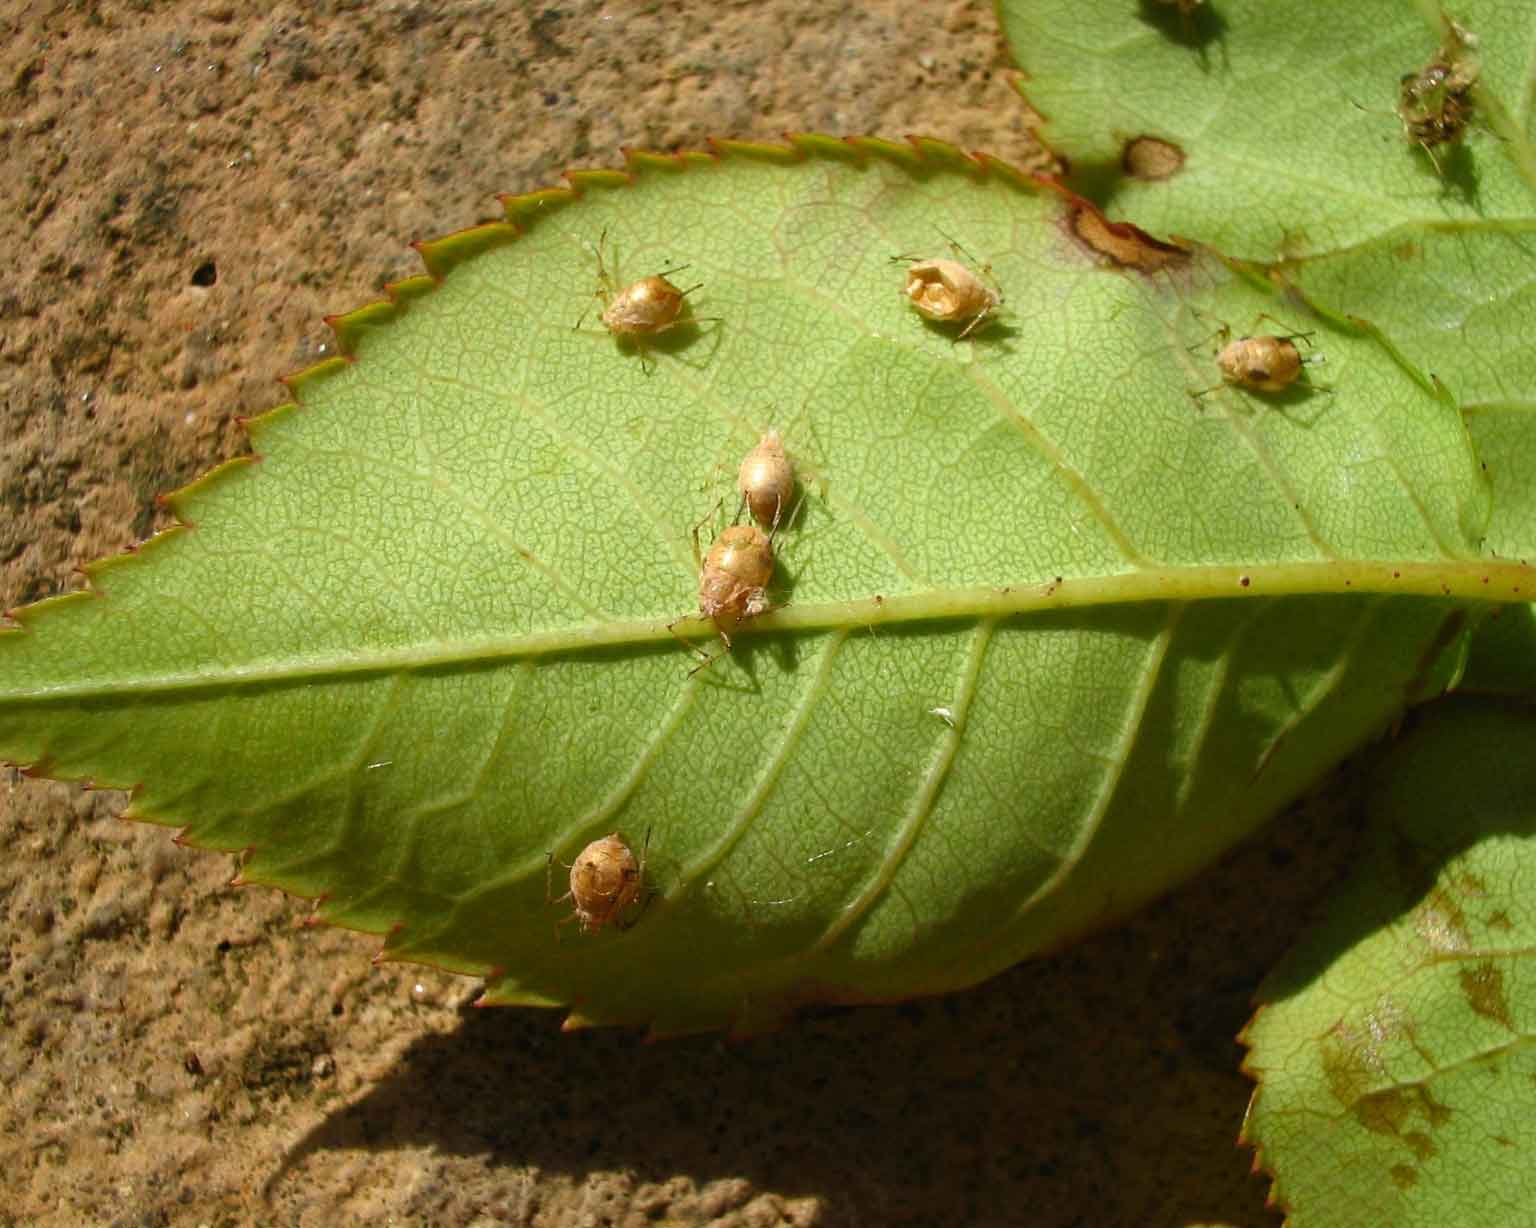 Figure 9. Mummies left after Aphidius colemani young hatch inside the aphid and eat their way out. Photo: Nick Dimmock, University of Northampton, Bugwood.org.